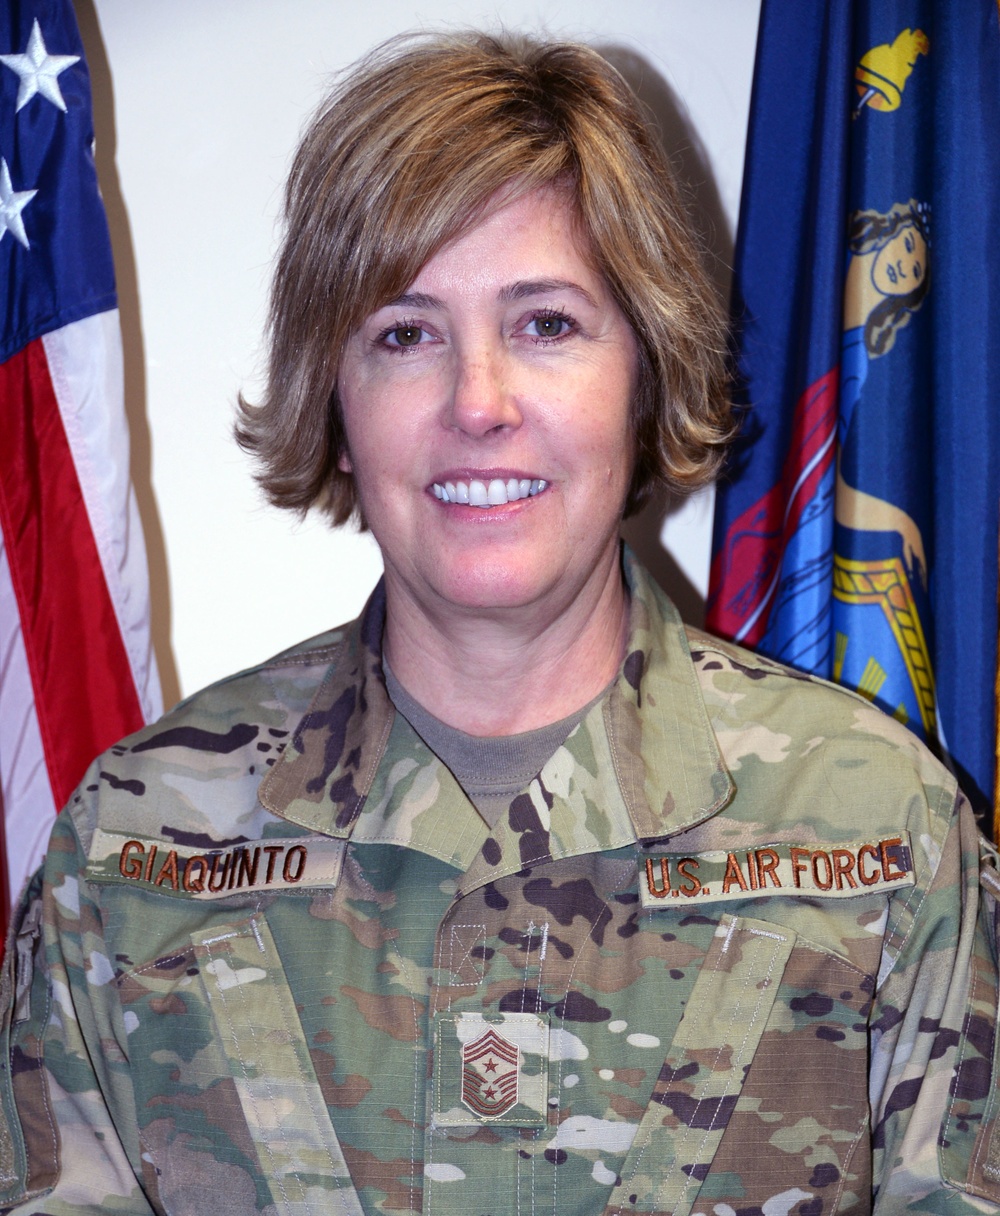 Command Chief Master Sgt. Amy Giaquinto